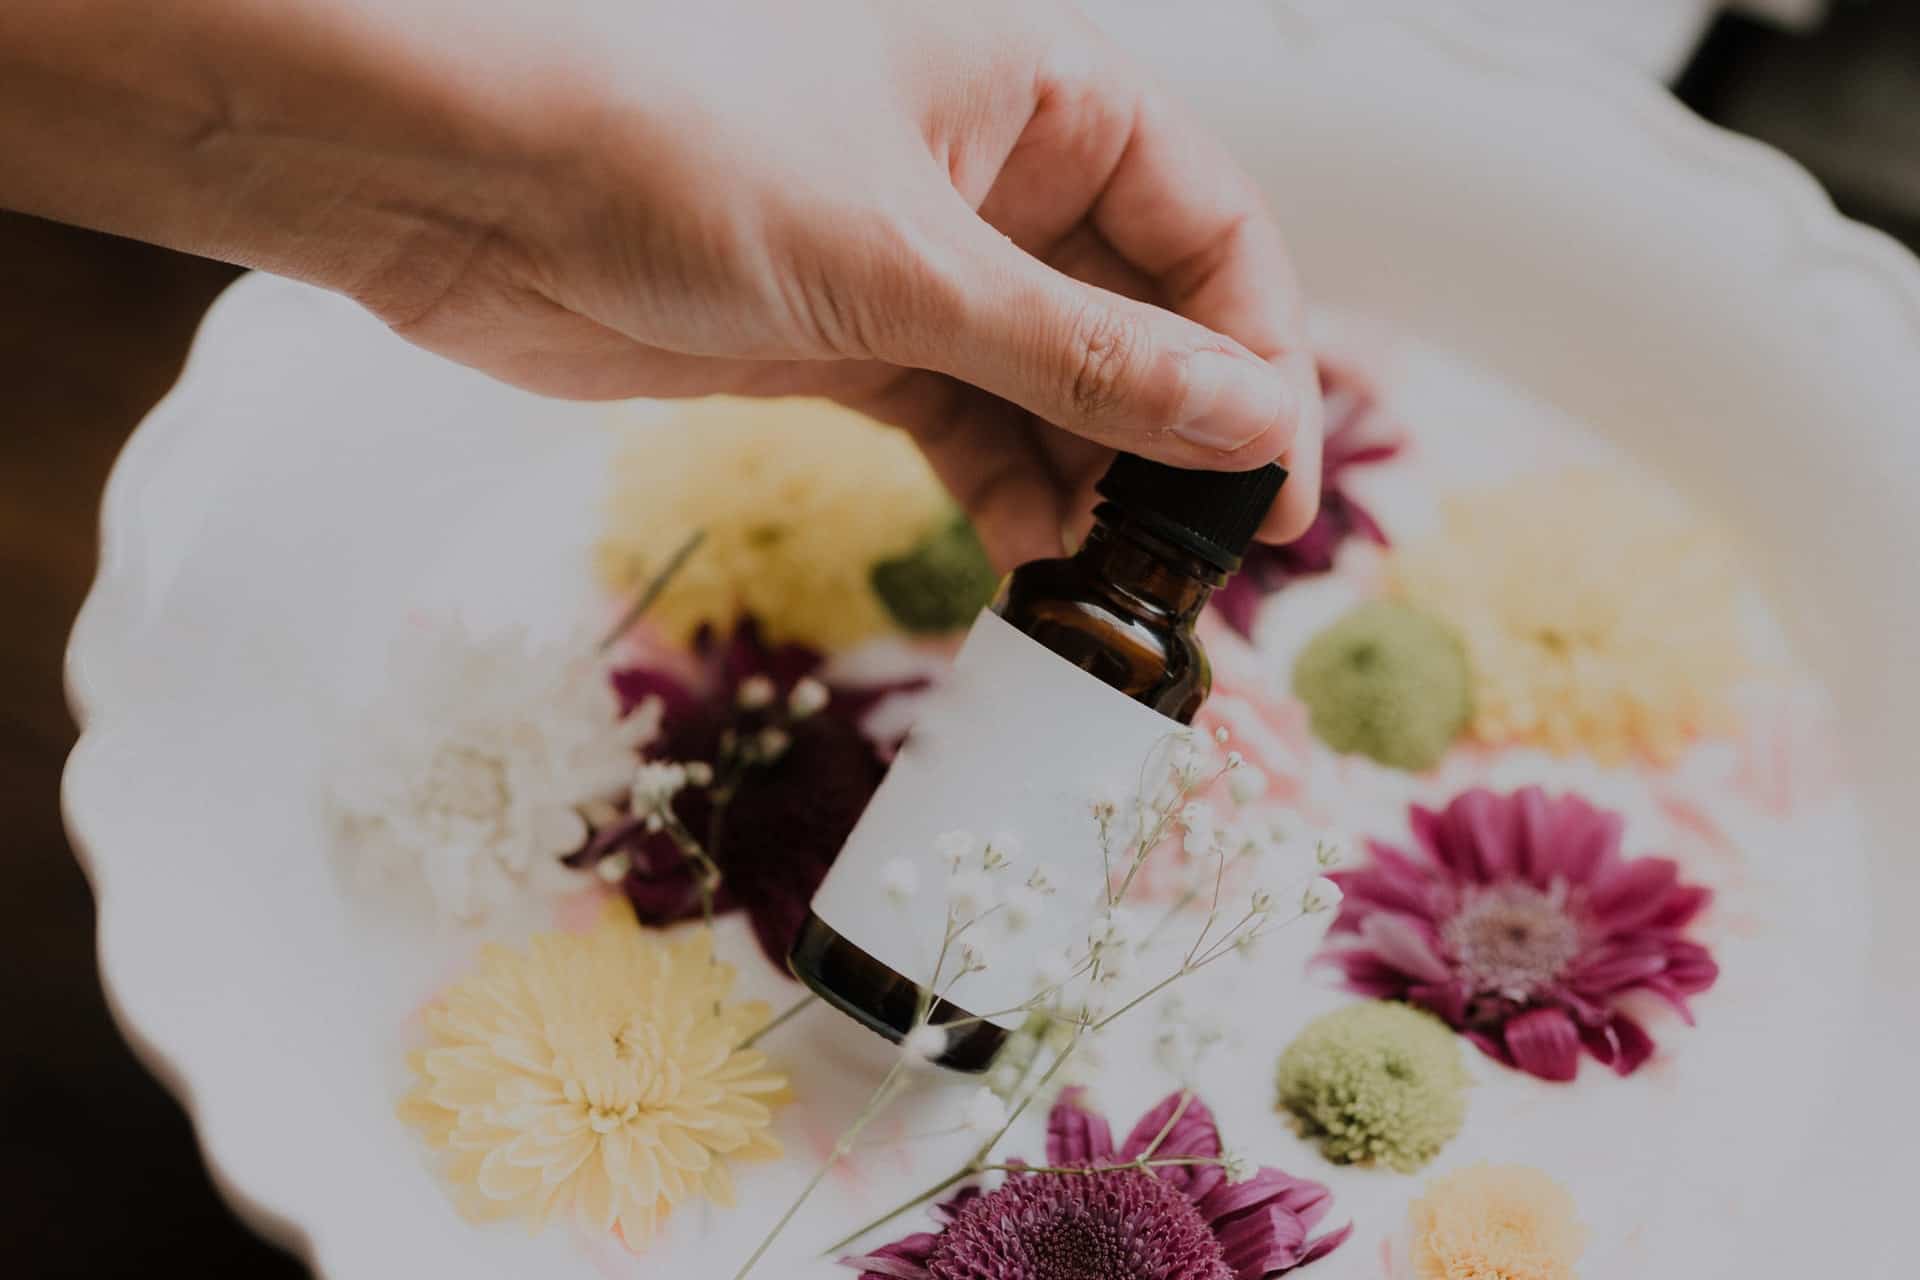 How Flower Essences Can Help With Depression & Anxiety